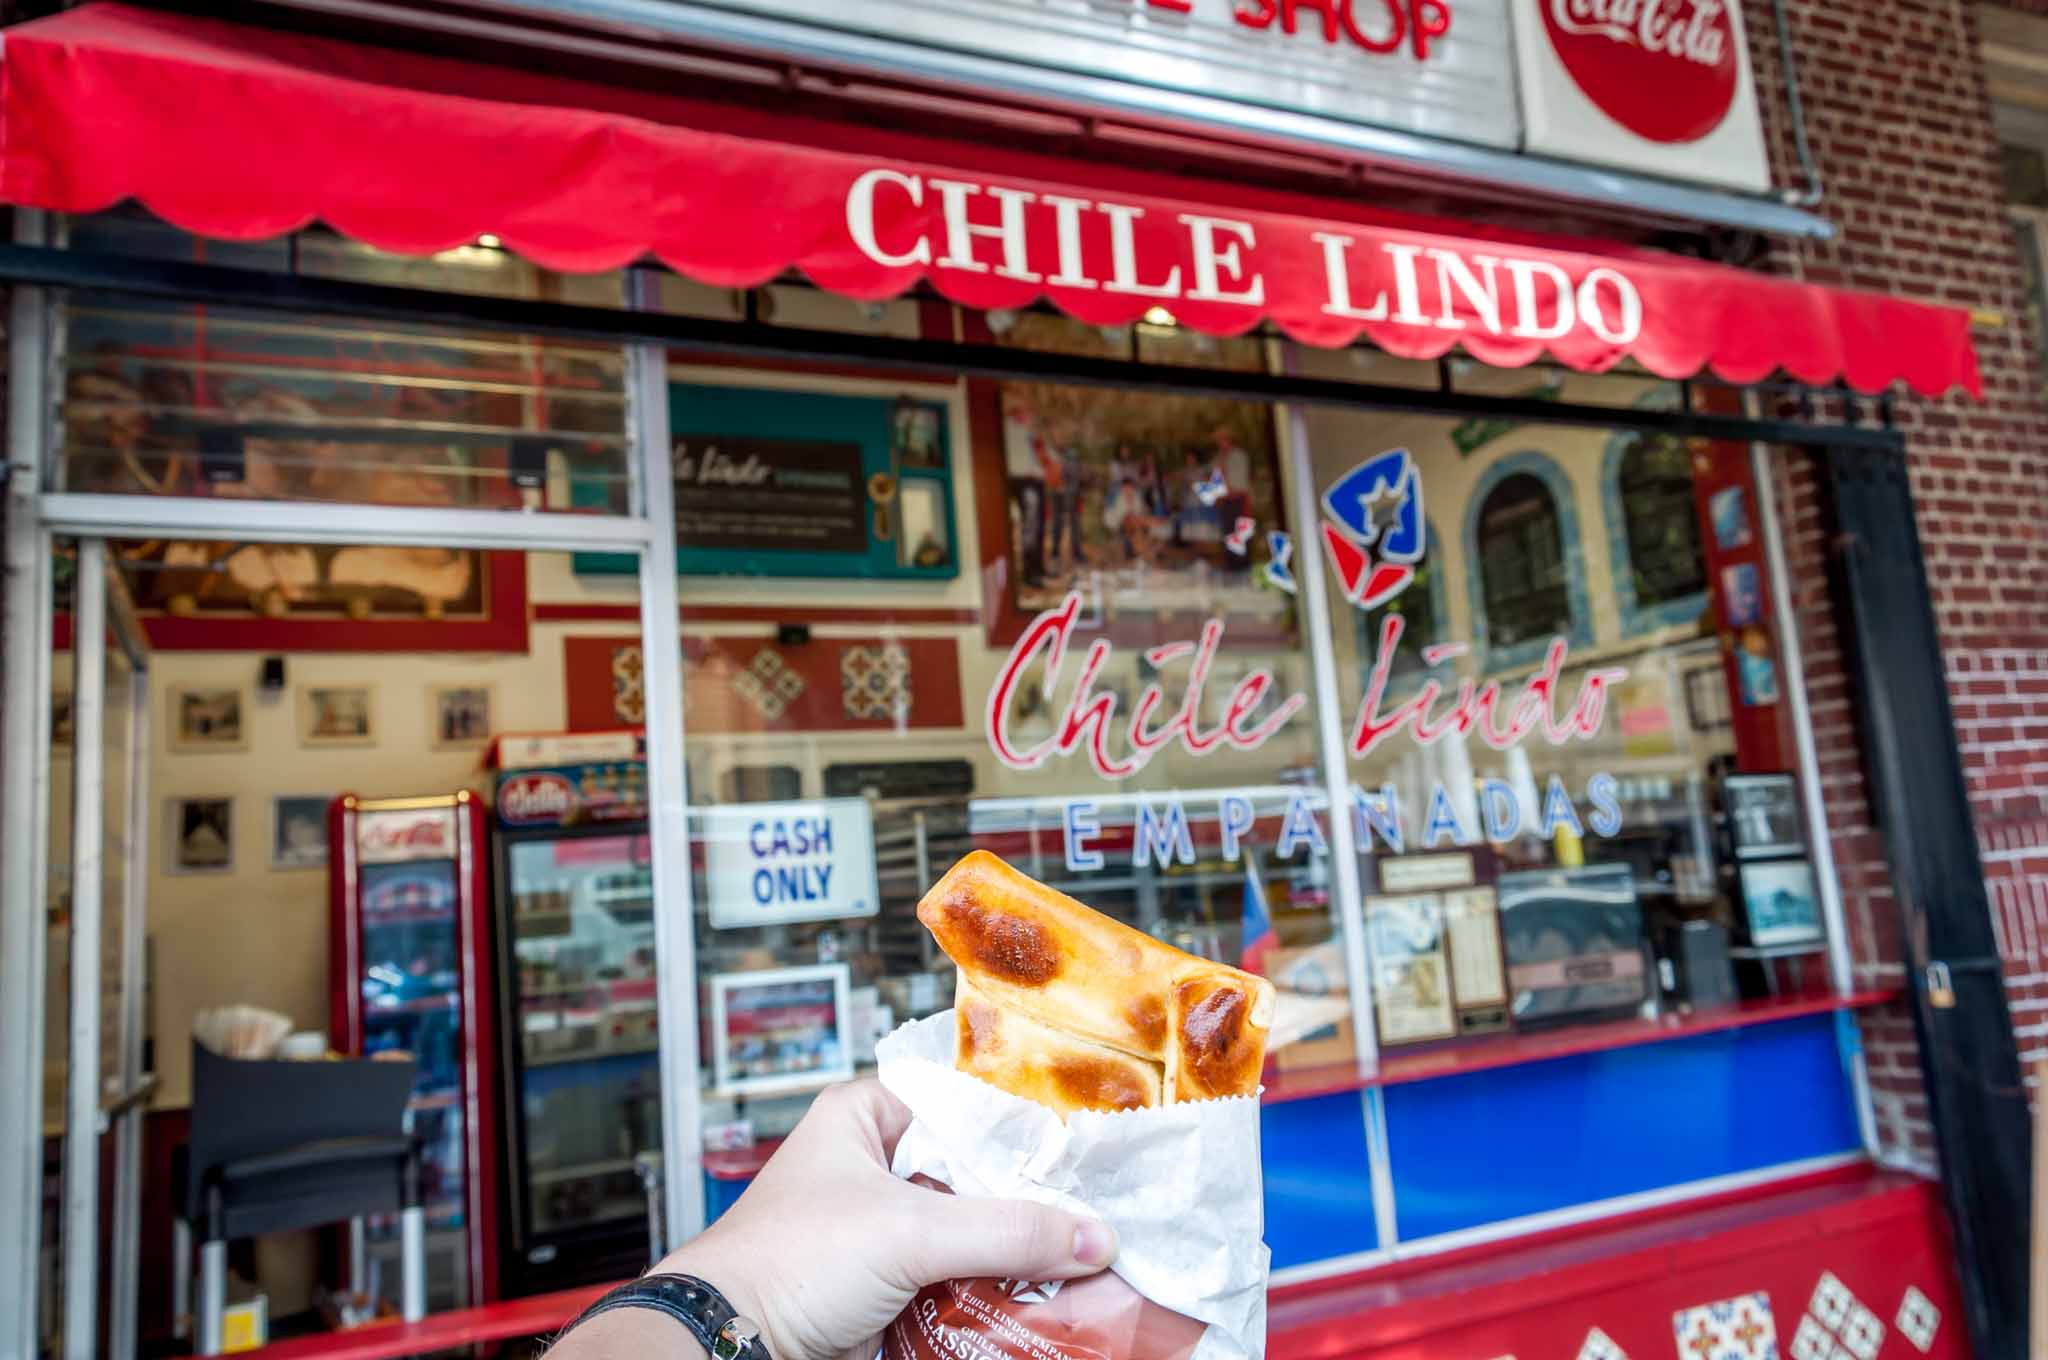 Chilean empanada in front of Chile Lindo storefront.